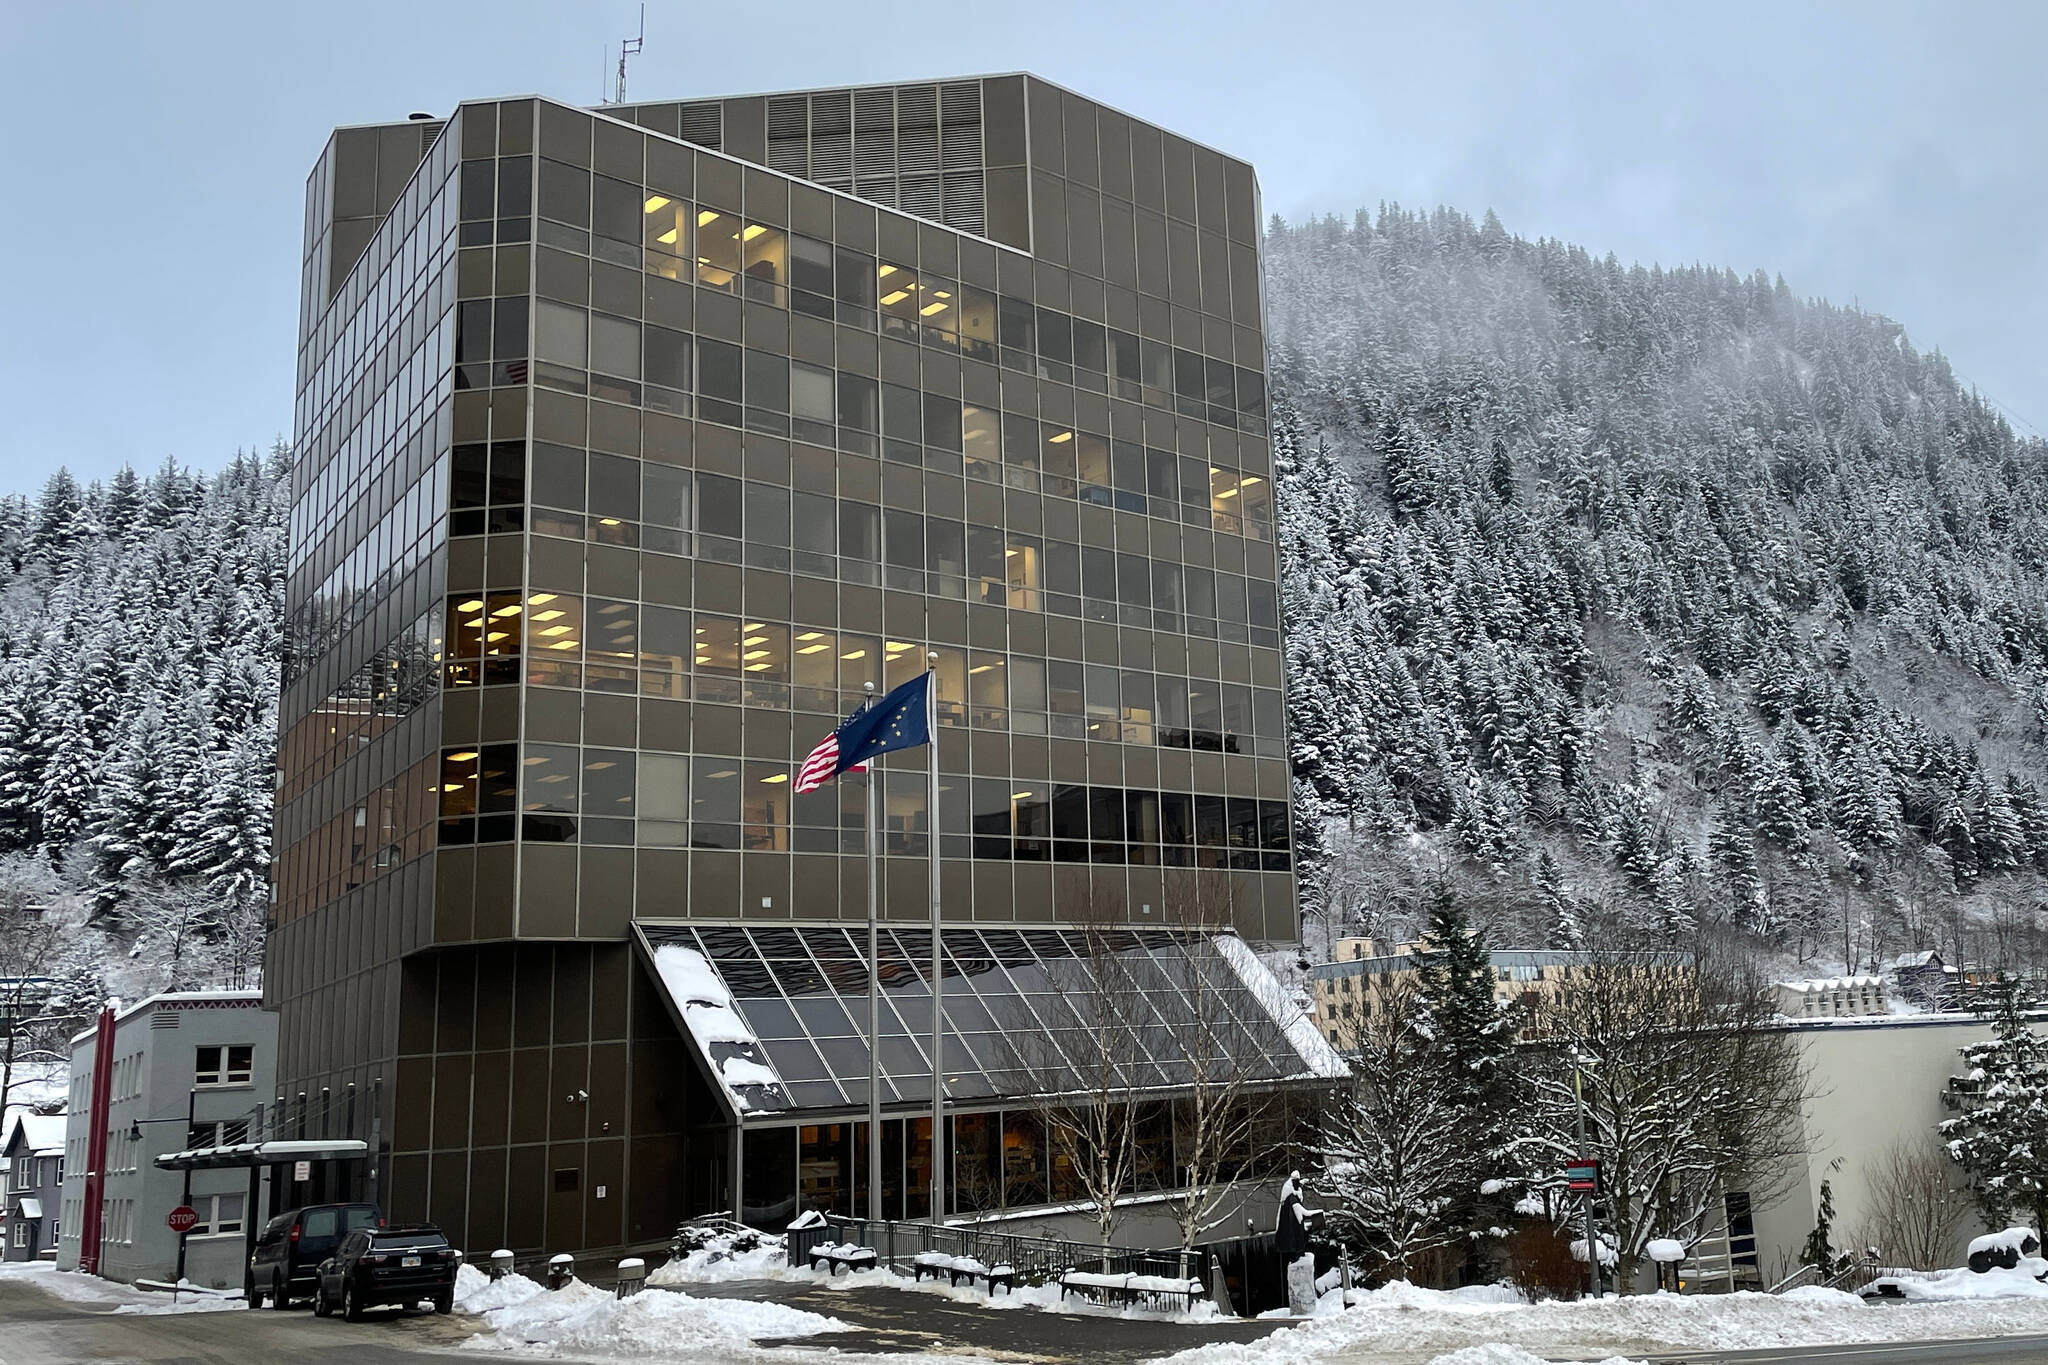 The trial for a man accused of a 2018 stabbing death in Yakutat has began in Juneau Superior Court at Dimond Courthouse. (Michael S. Lockett / Juneau Empire file)